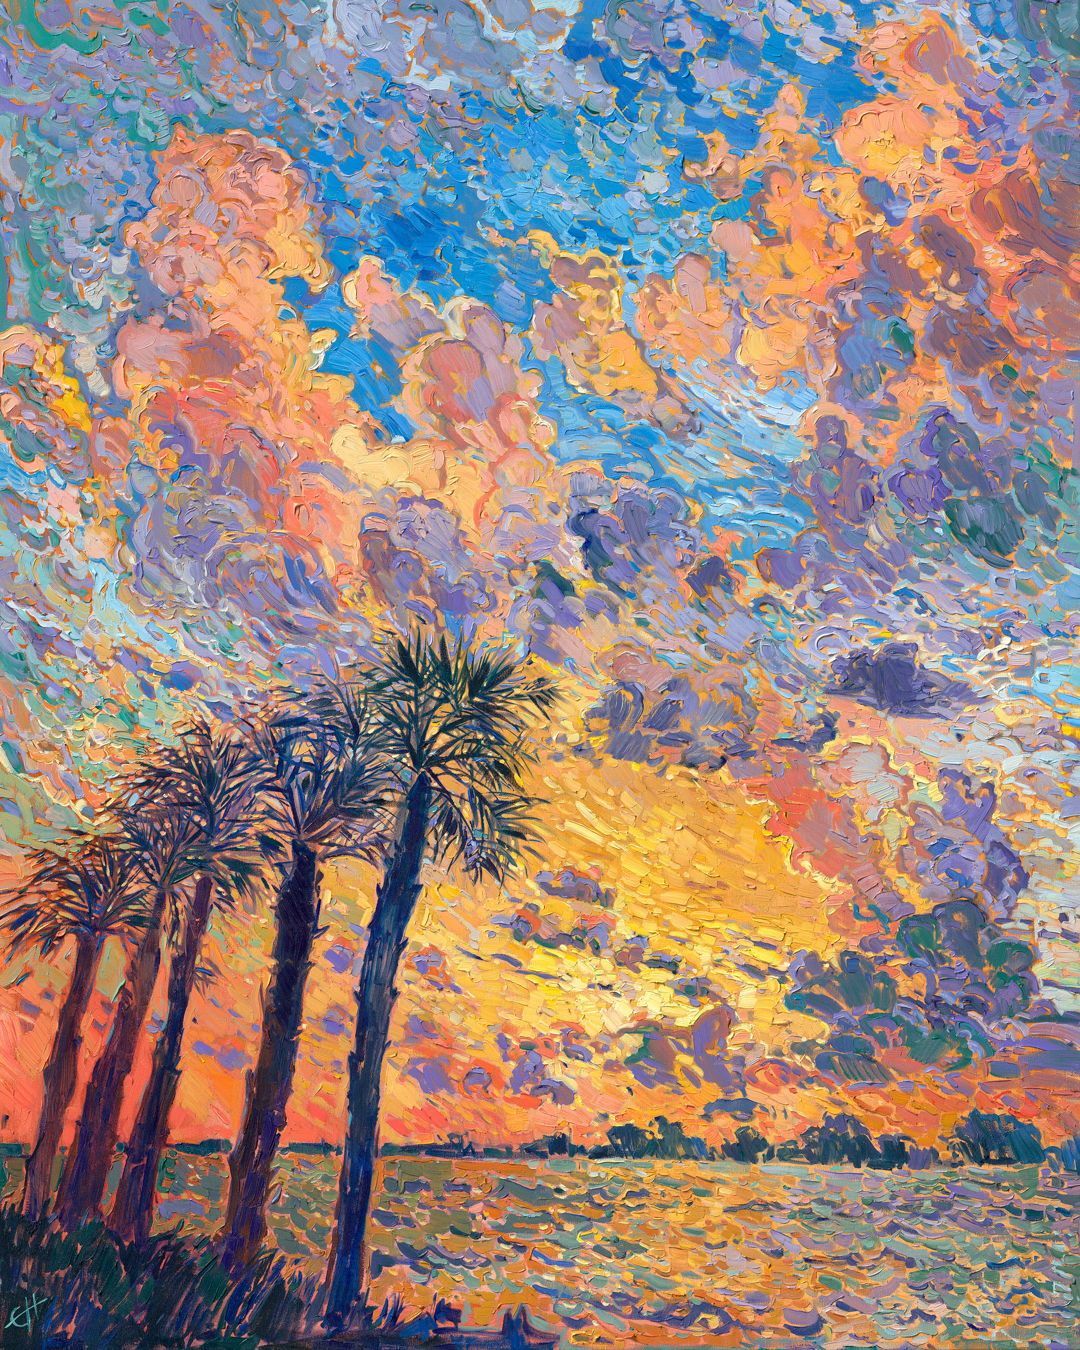 Explosions Of Colors, Vibrant Nature Paintings By Erin Hanson (18)